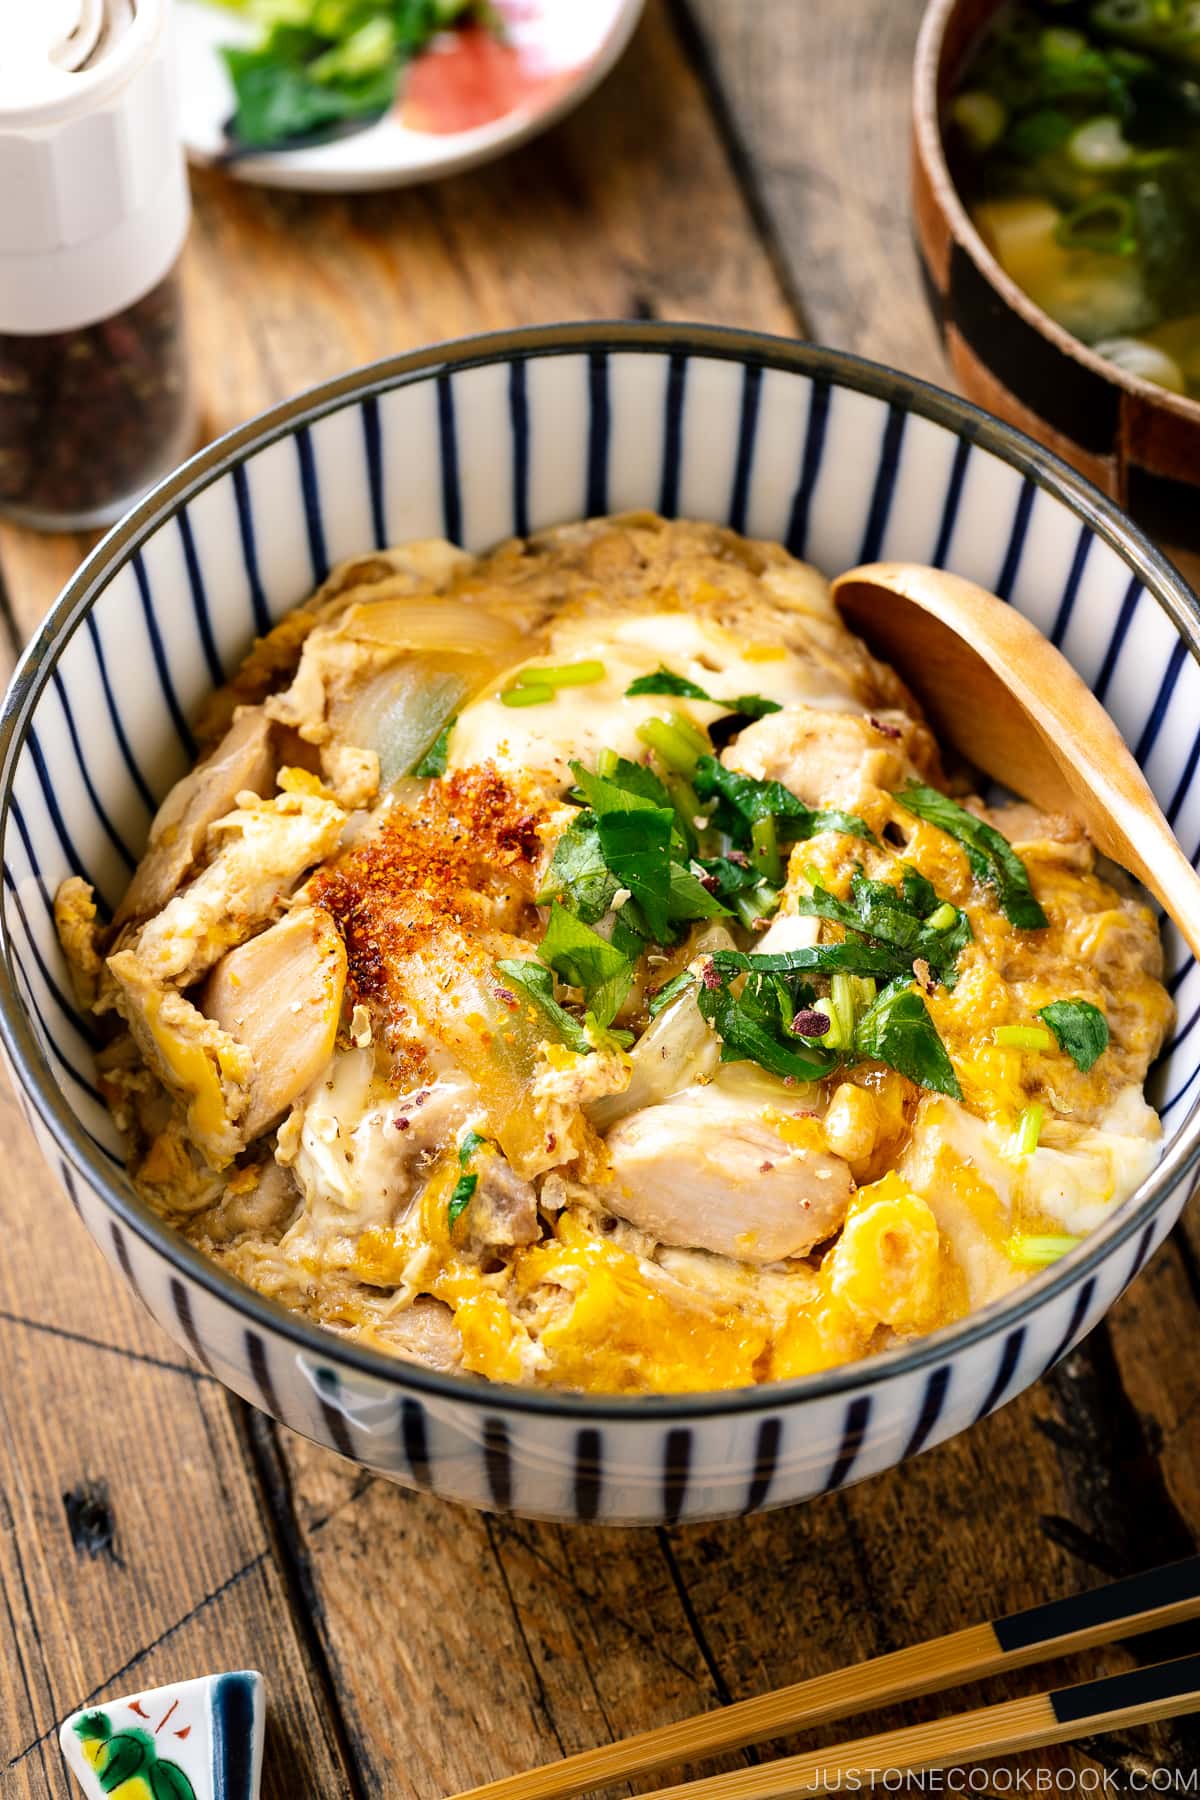 A Japanese donburi bowl containing Oyakodon, chicken and egg rice bowl.